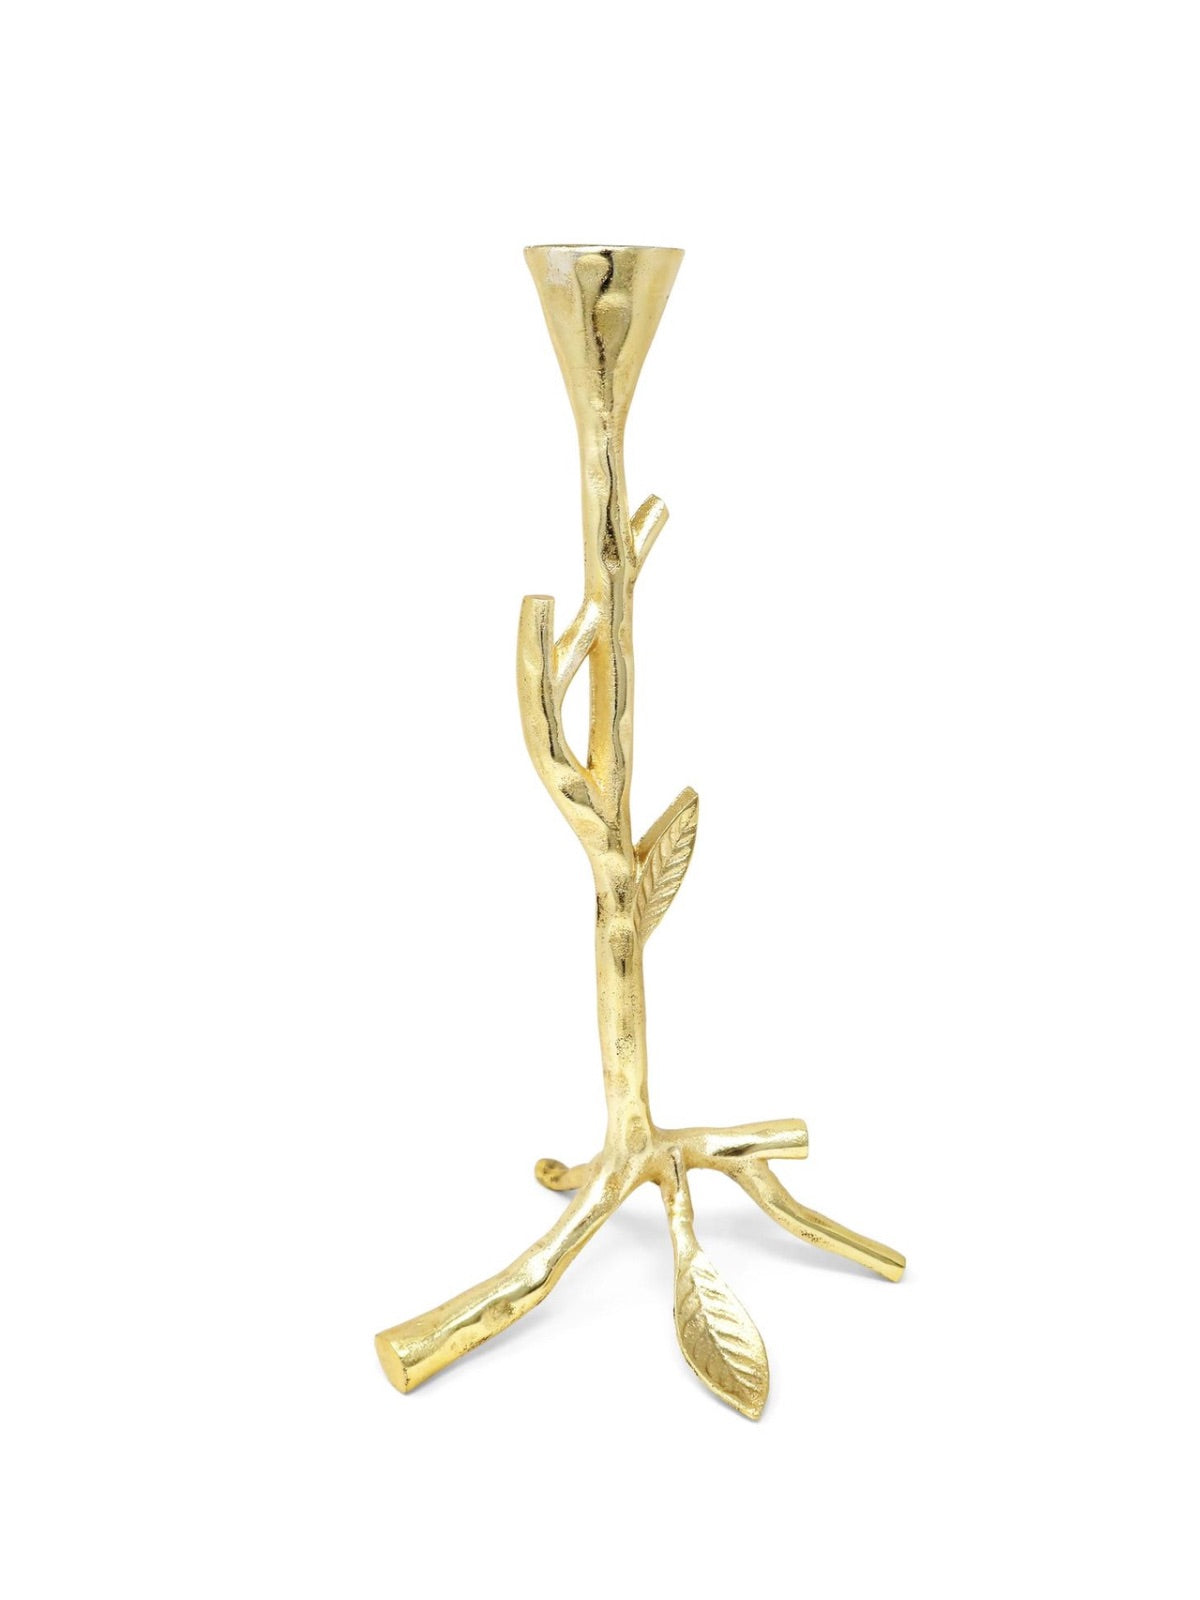 Stainless Steel Gold Taper Candle Holders with Luxury Branch Design in Large Size.